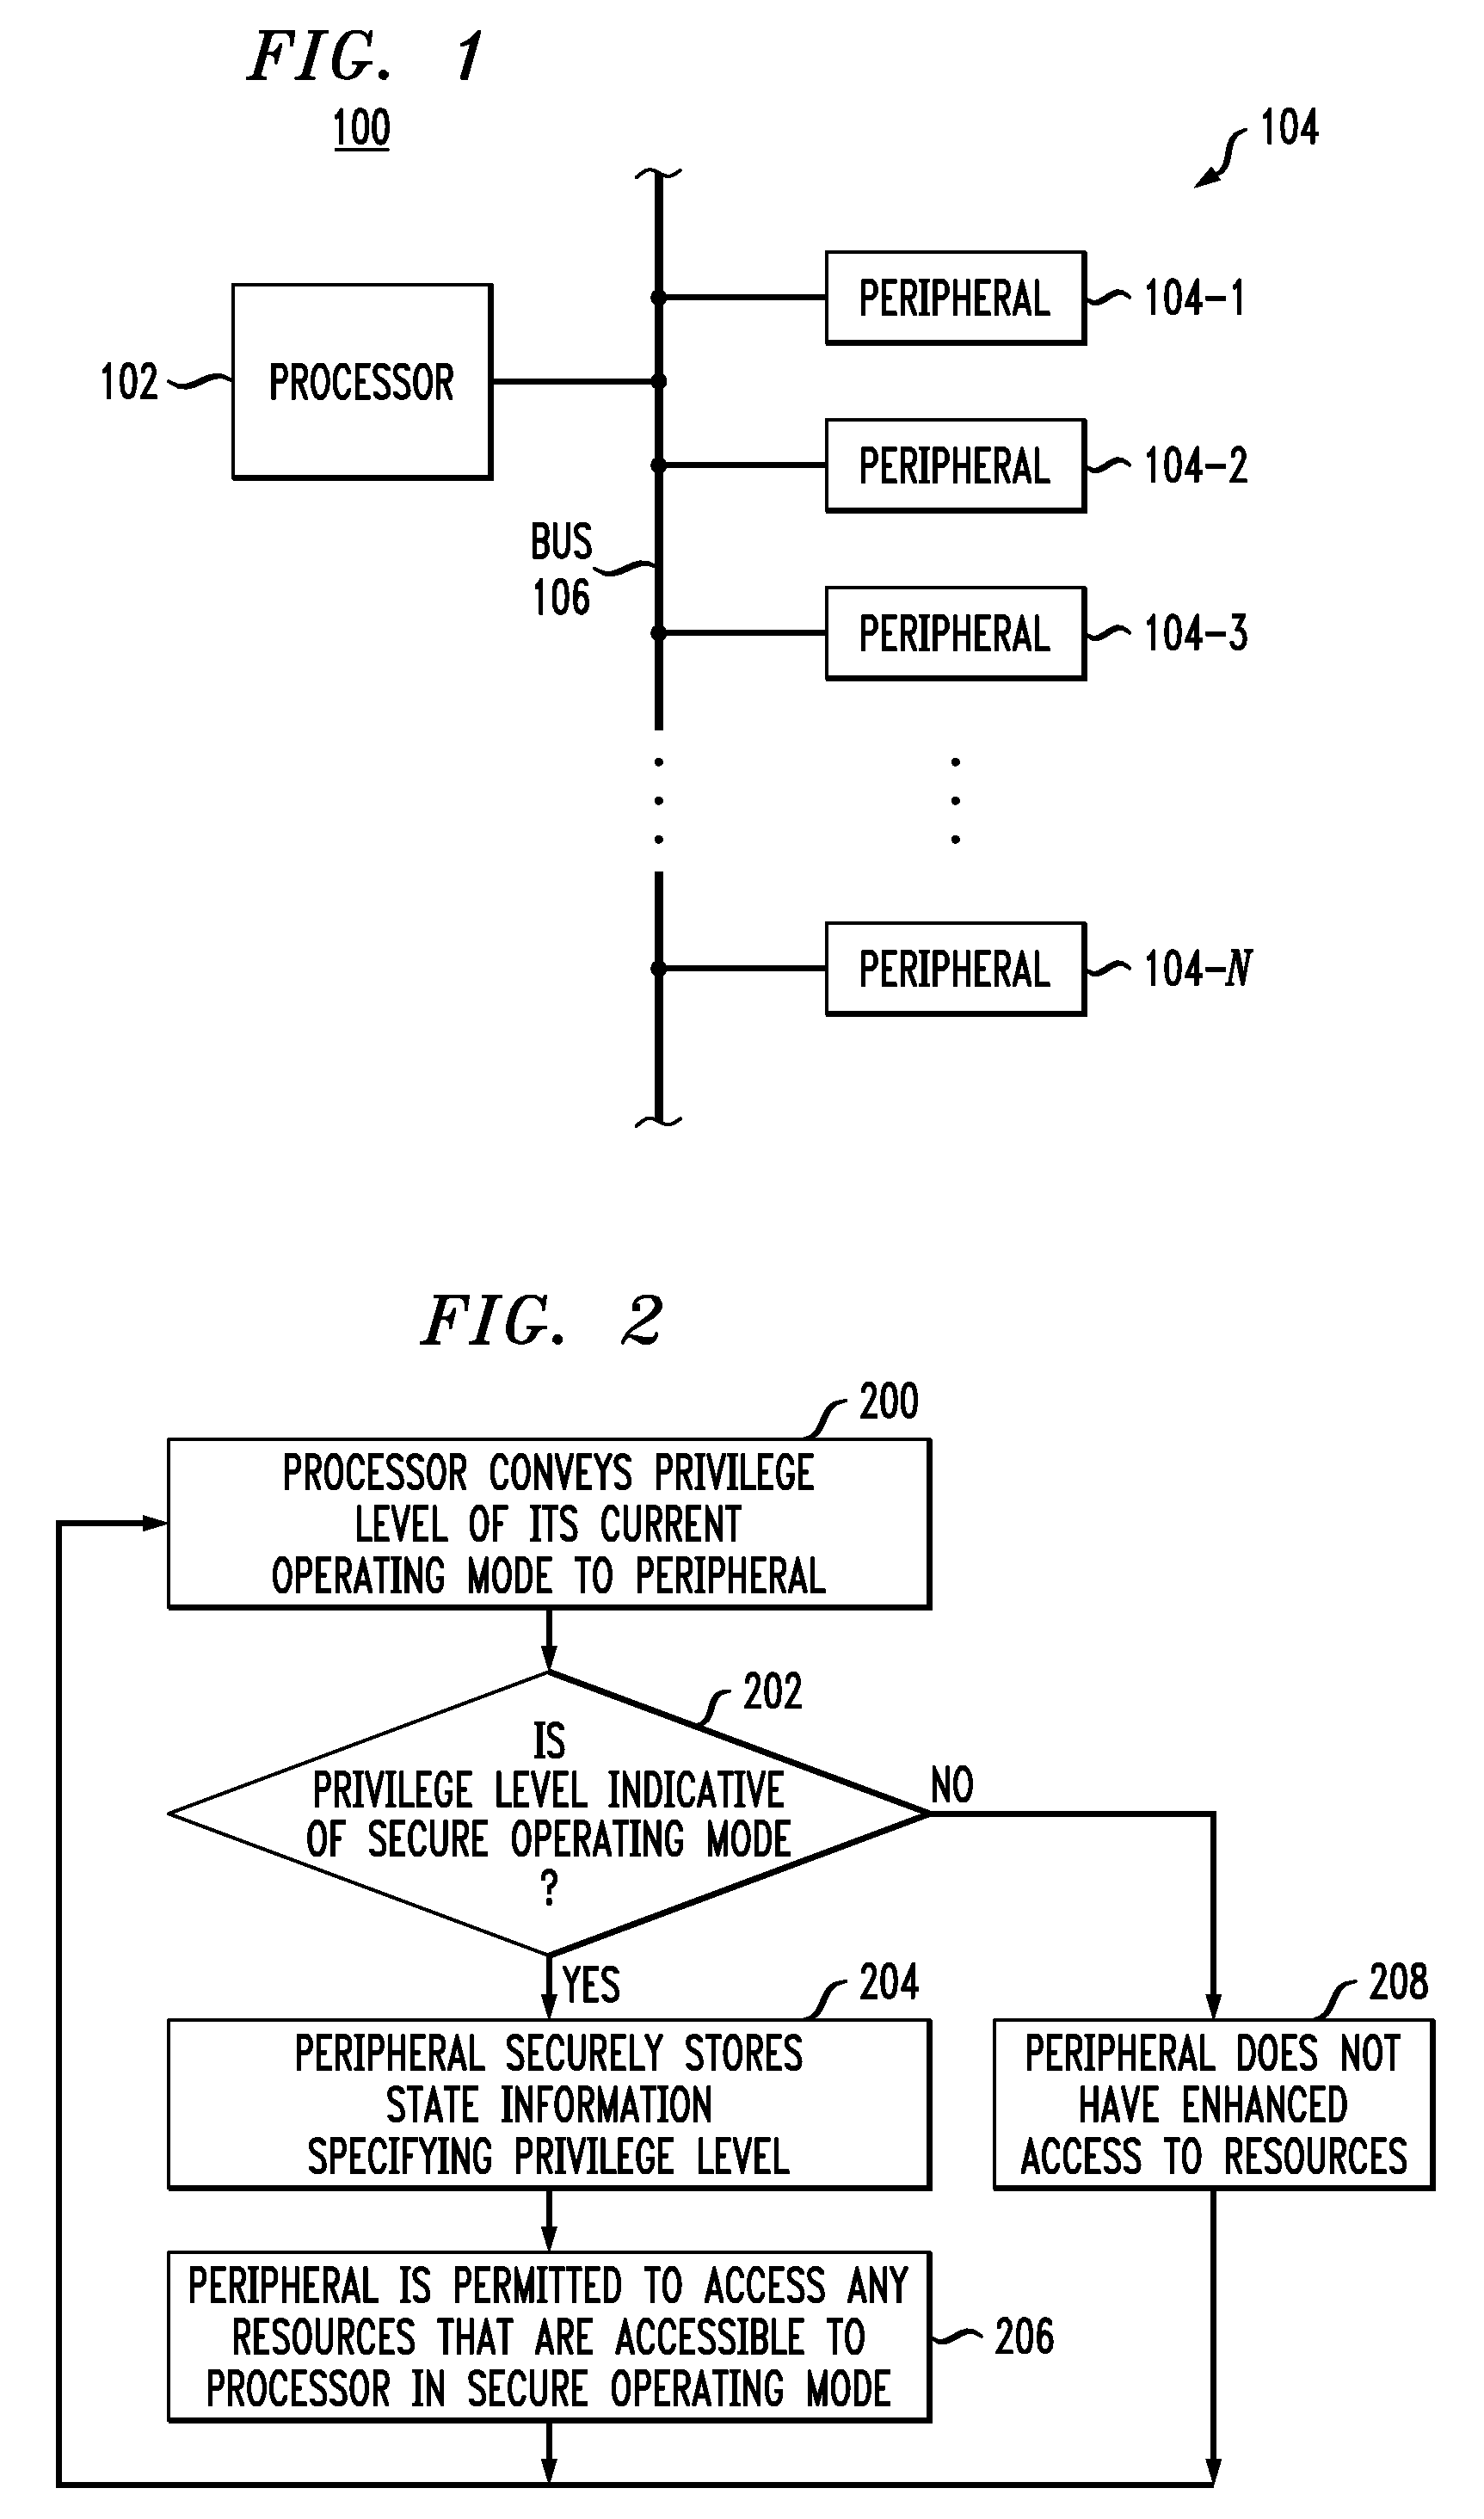 Method and Apparatus for Delegation of Secure Operating Mode Access Privilege from Processor to Peripheral